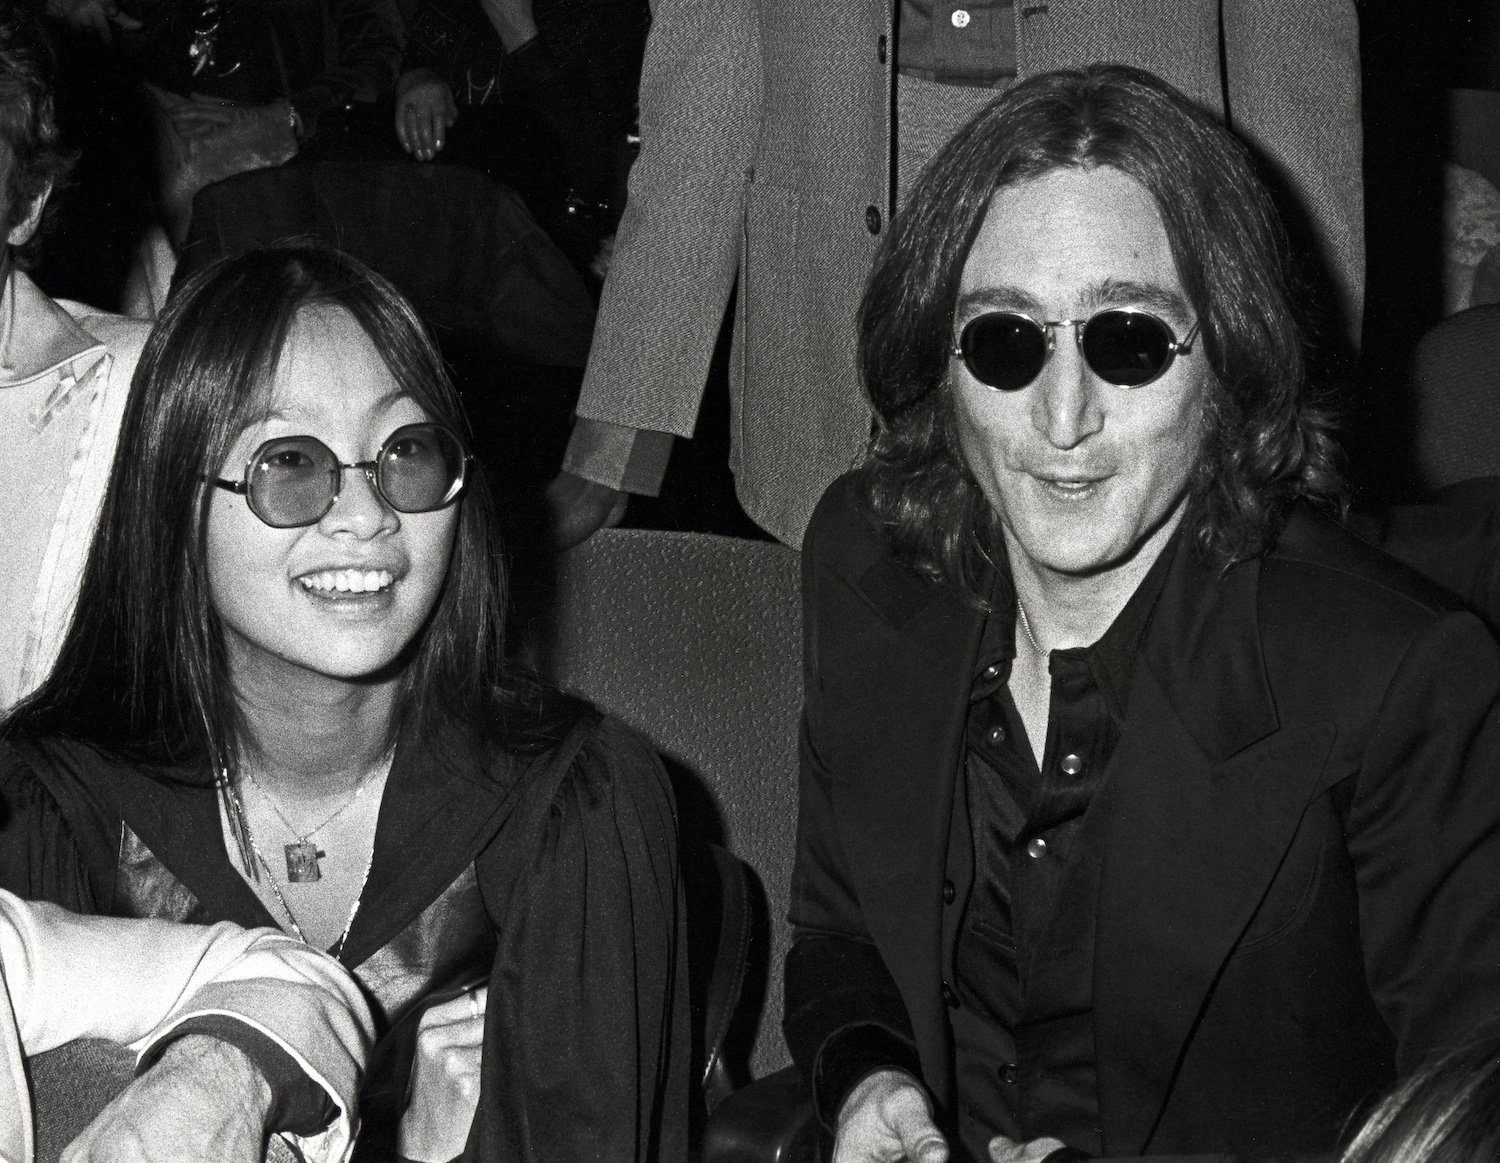 May Pang and John Lennon at the Beacon Theater in New York City